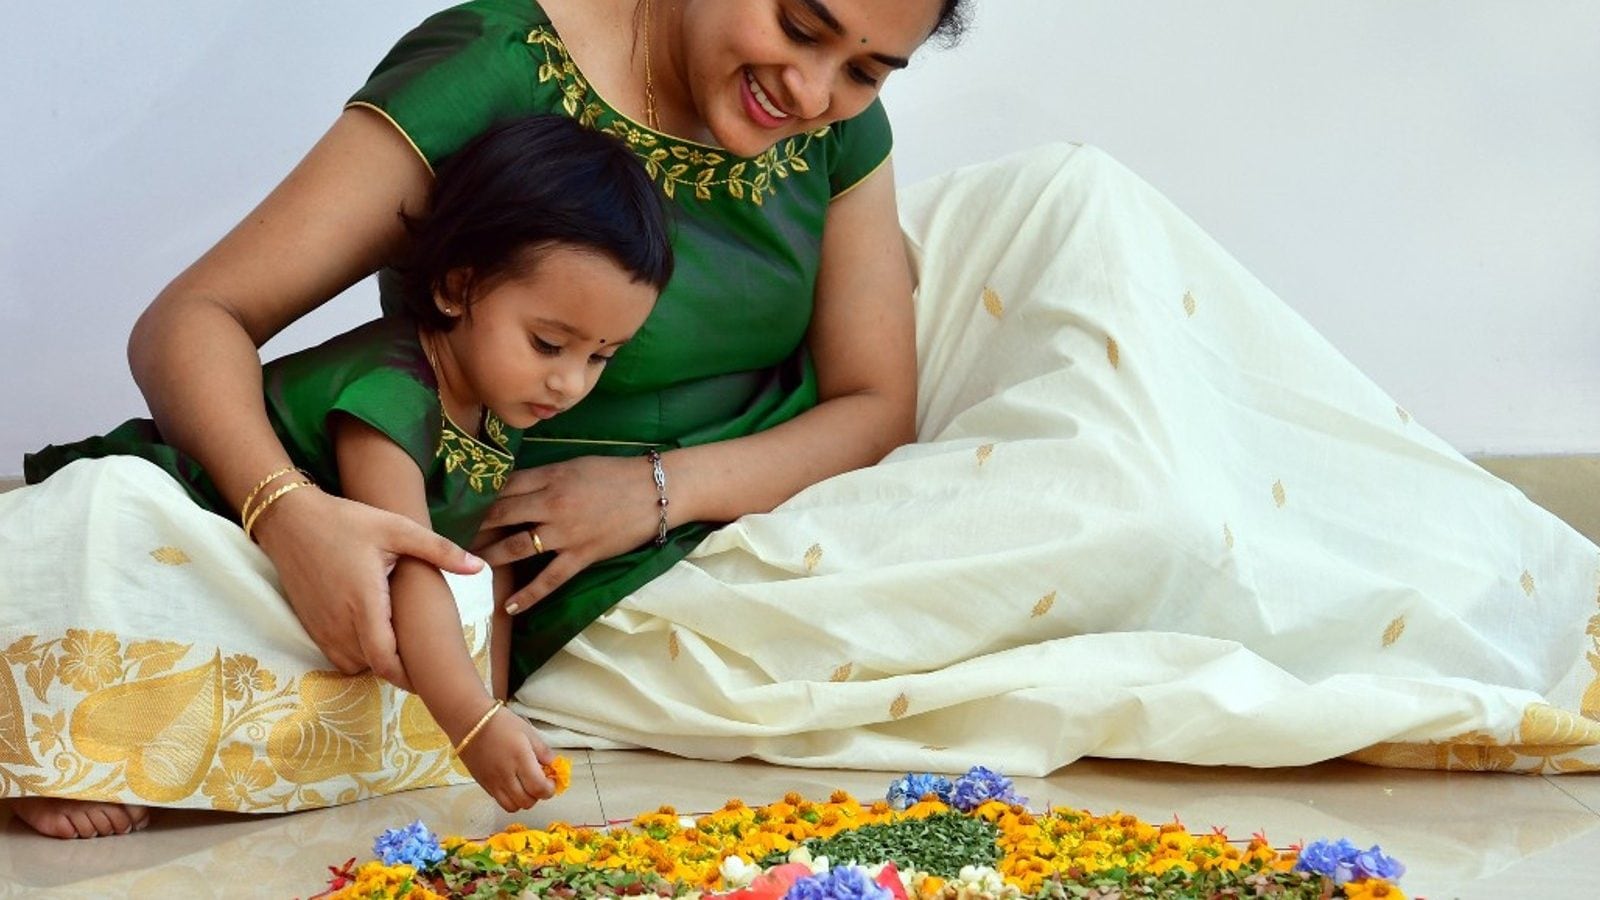 Traditional Home Decoration Ideas For the Harvest Festival of Kerala